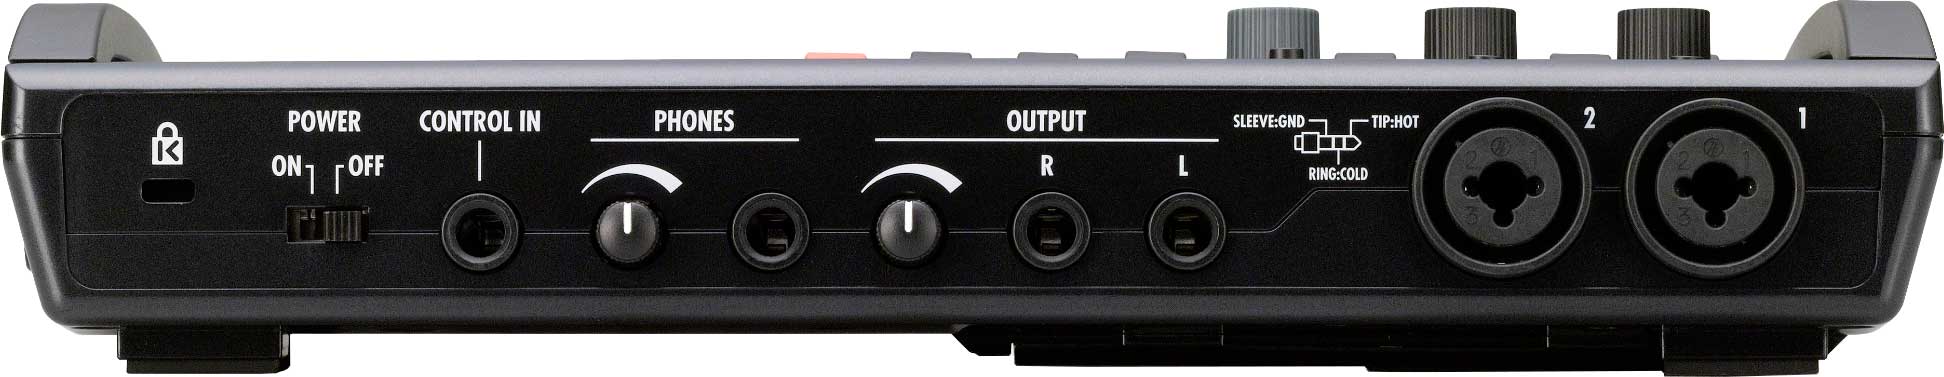 Zoom R8 - 8 Track Recorder and Audio Interface | guitarguitar